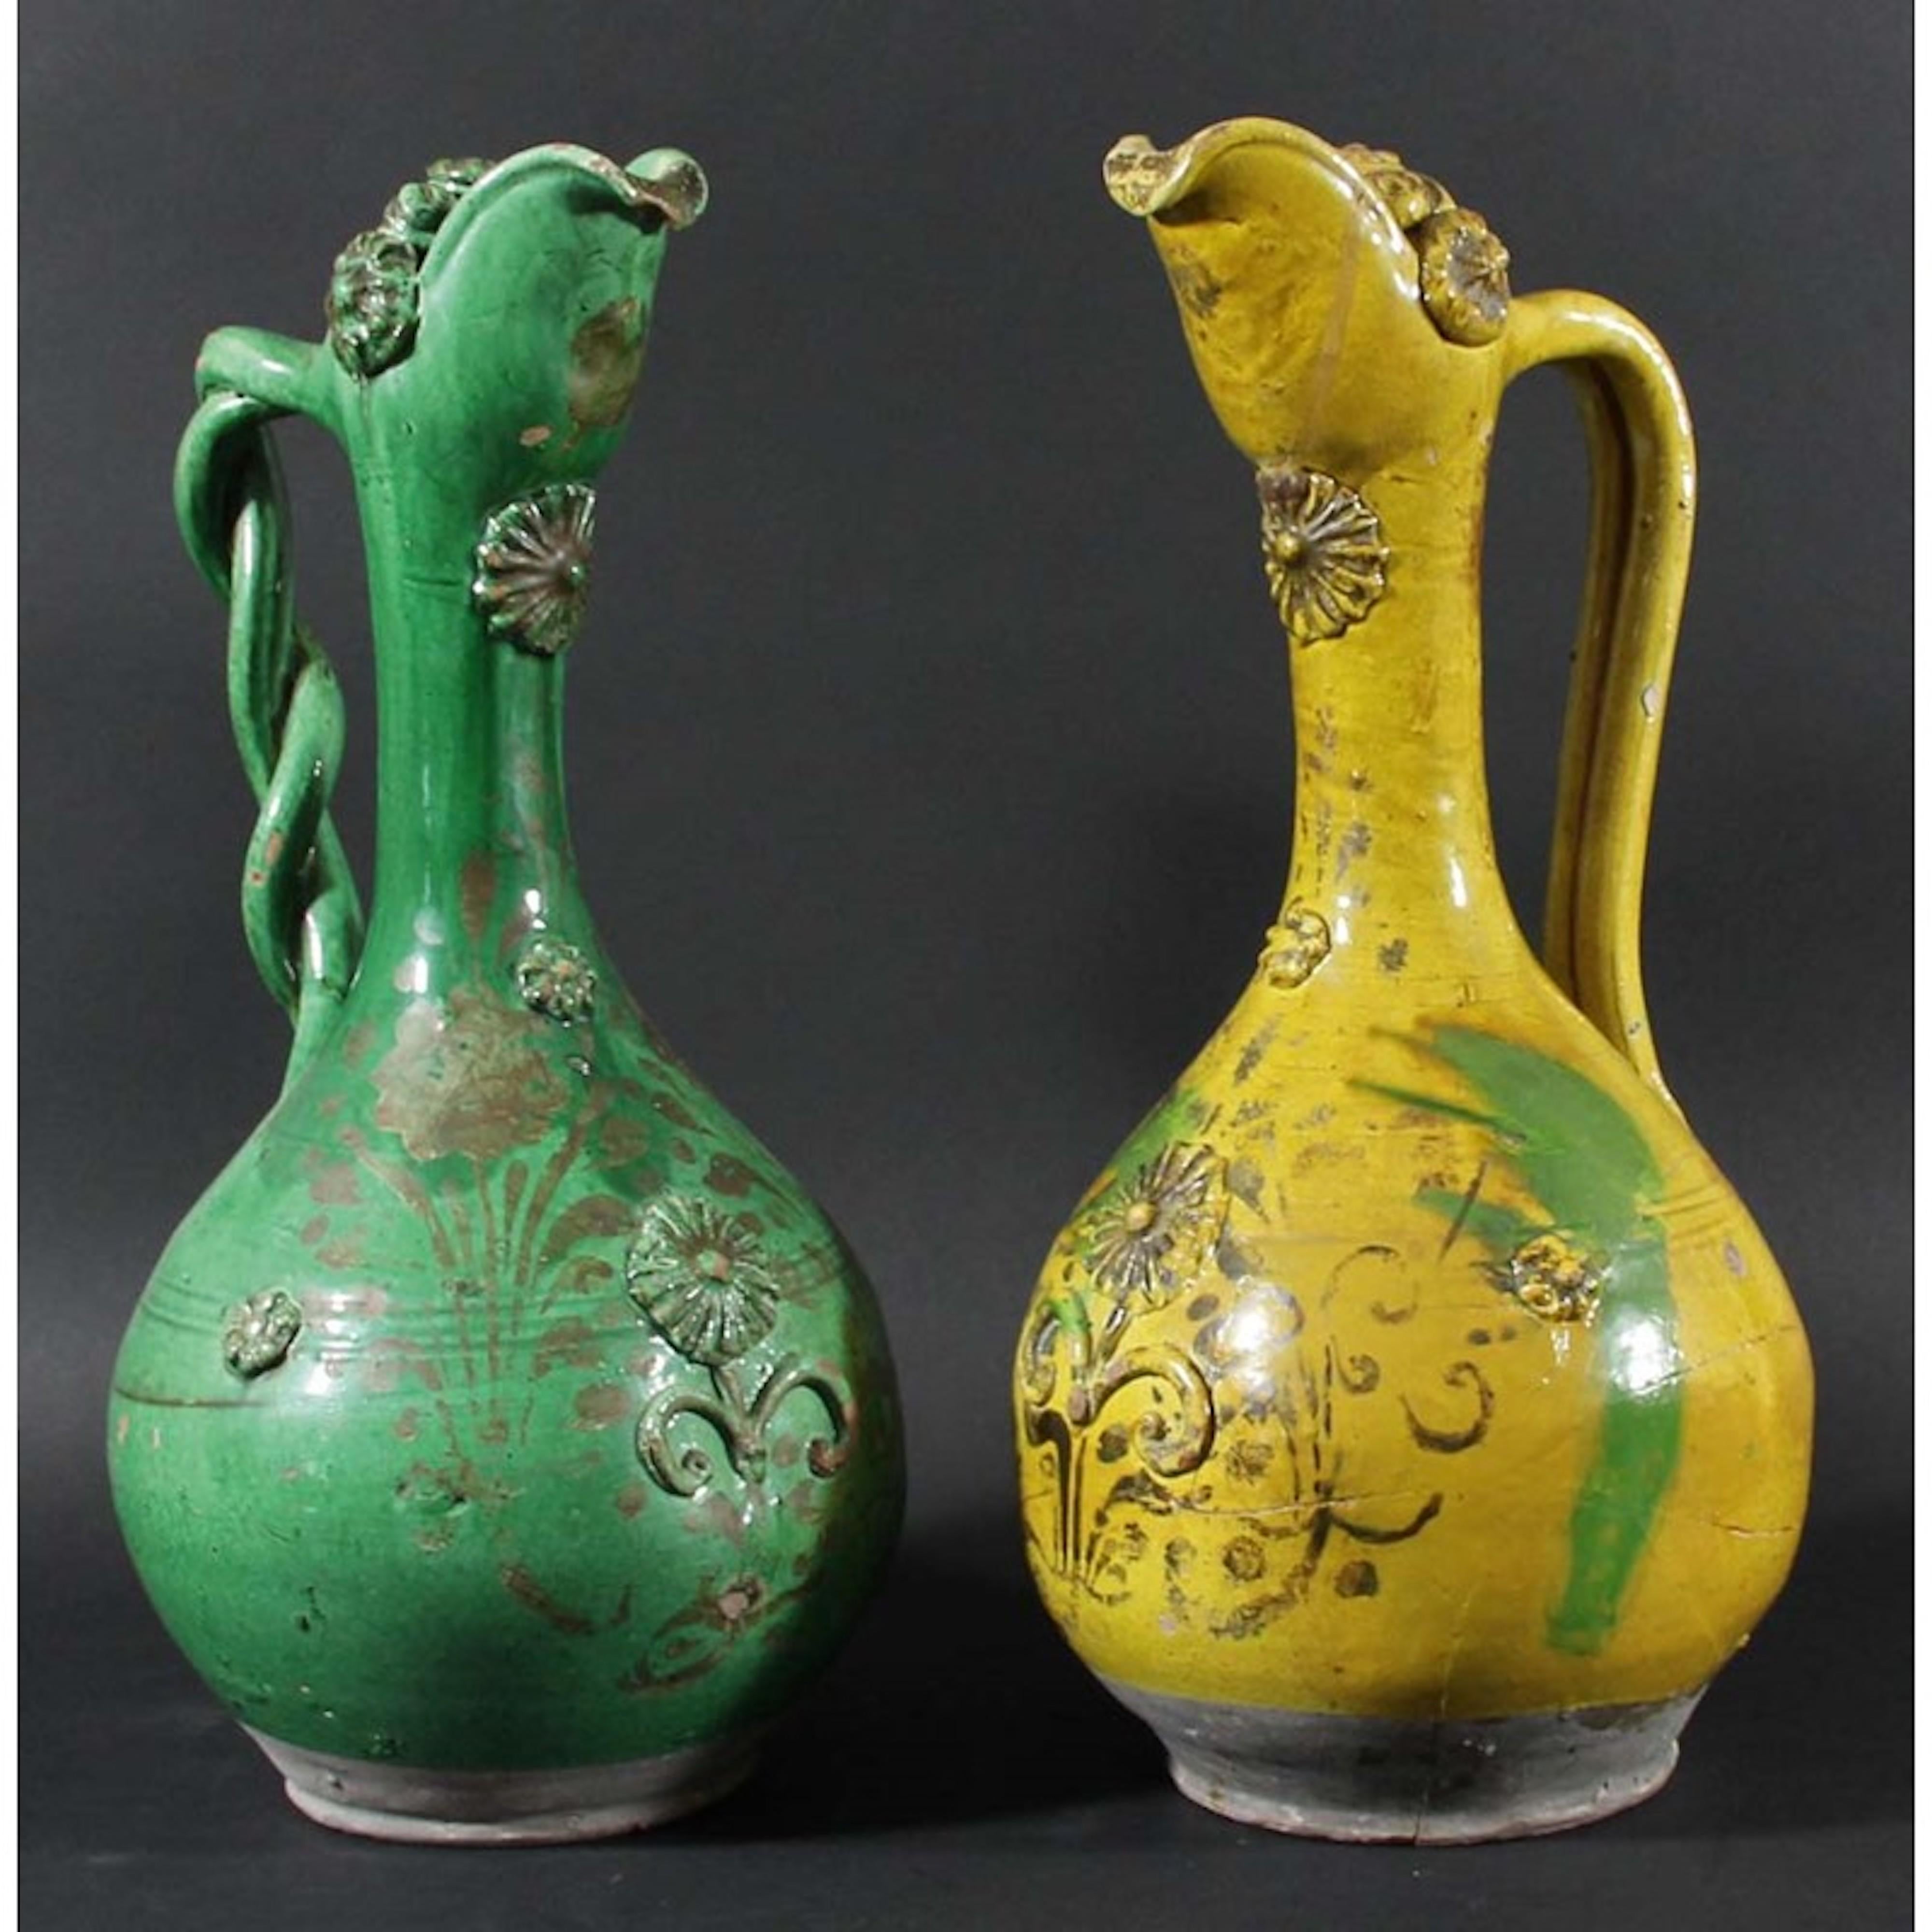 Fine, pair of 19th century, ottoman revival, canakkale, green and ochre, gilded and moulded, terracotta ewers

- Characteristic of the unique Canakkale Ottoman Revival style in form, composition and color
- Canakkale was the most important centre